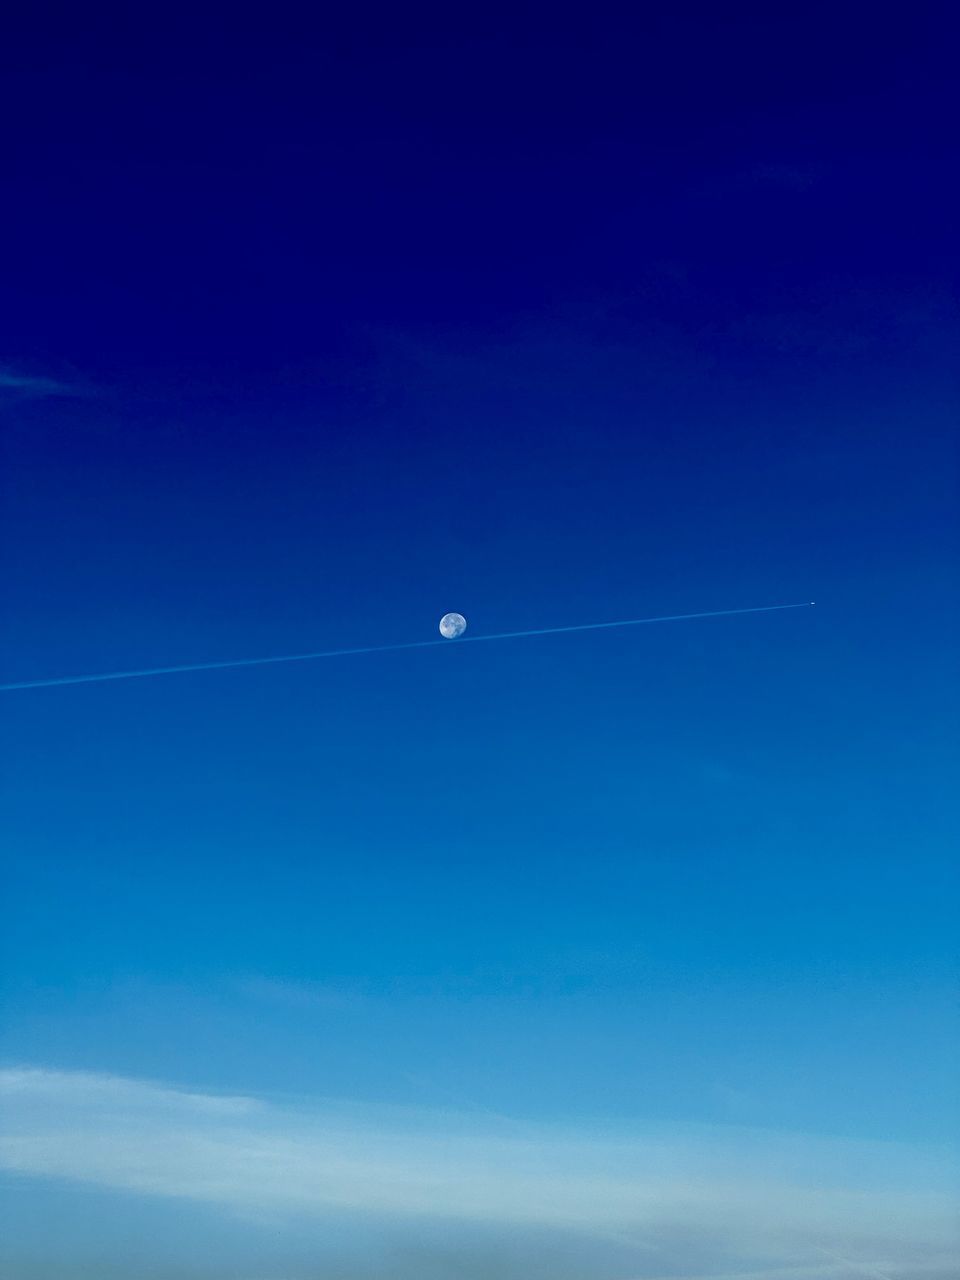 sky, blue, horizon, cloud, flying, nature, scenics - nature, beauty in nature, no people, vapor trail, air vehicle, tranquil scene, tranquility, copy space, mid-air, low angle view, clear sky, transportation, outdoors, moon, day, airplane, astronomical object, distant, motion, dawn, environment